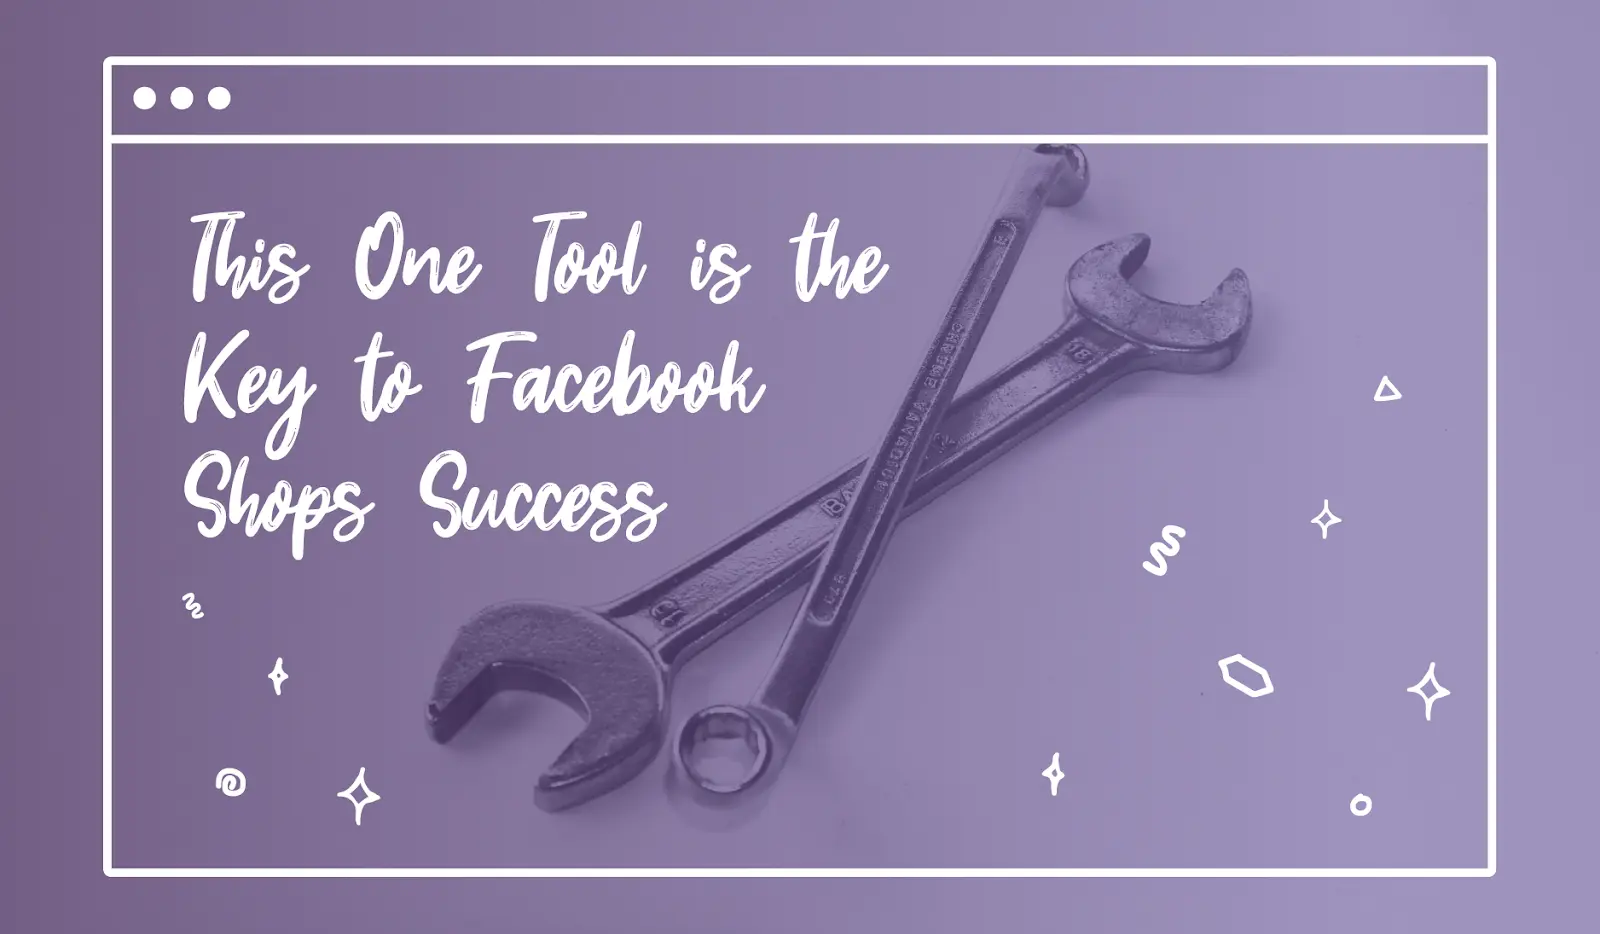 This One Tool is the Key to Facebook Shops Success